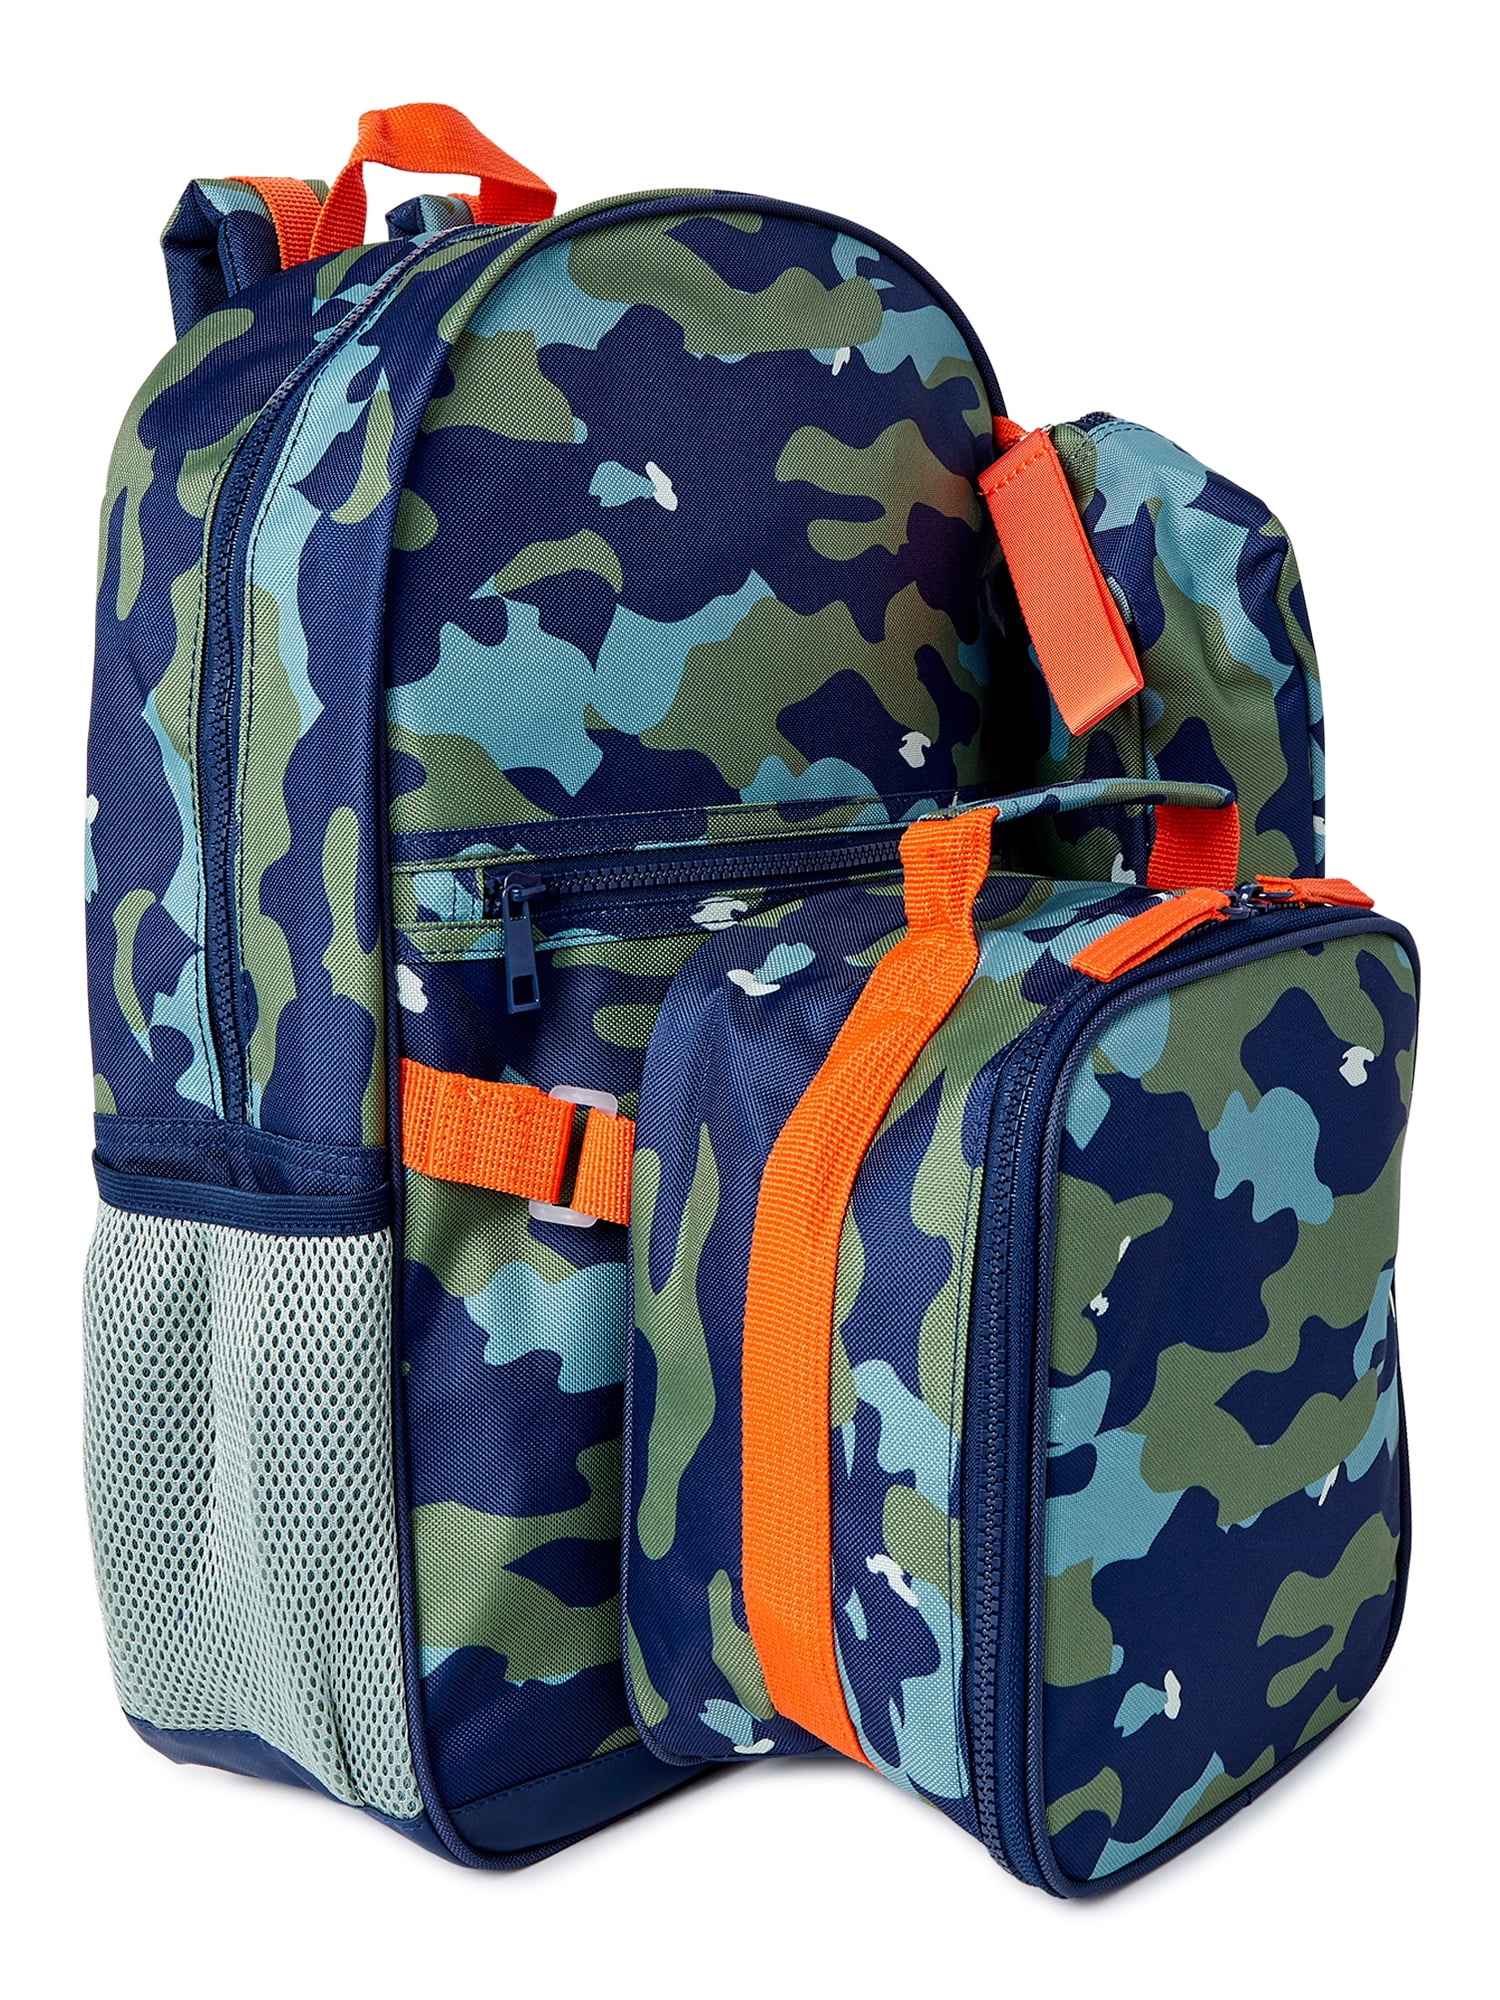 goldwheat School Backpack for Boys Cool Camouflage Bookbags with Lunch Box  Pencil Case 3pcs for Middle School